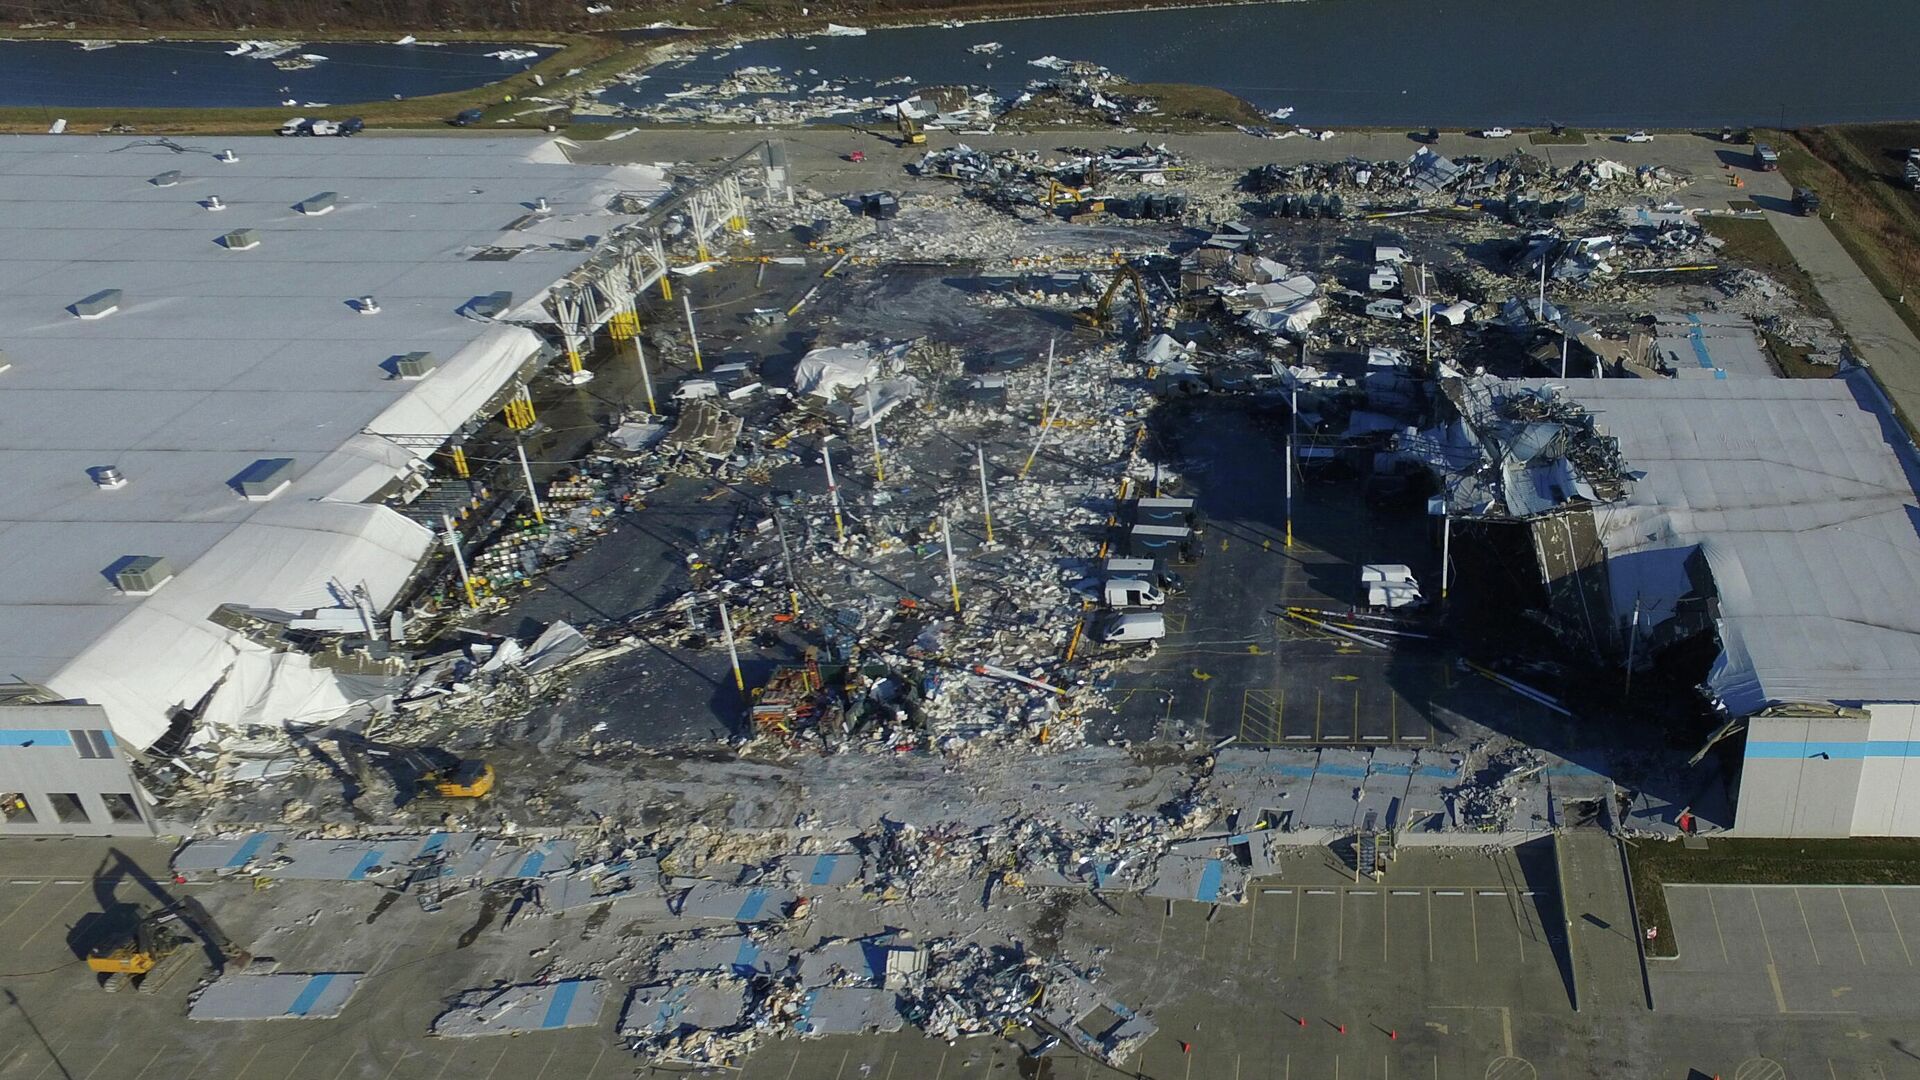 The site of a roof collapse at an Amazon.com distribution centre a day after a series of tornadoes dealt a blow to several U.S. states, in Edwardsville, Illinois, U.S. December 11, 2021 - Sputnik International, 1920, 12.12.2021